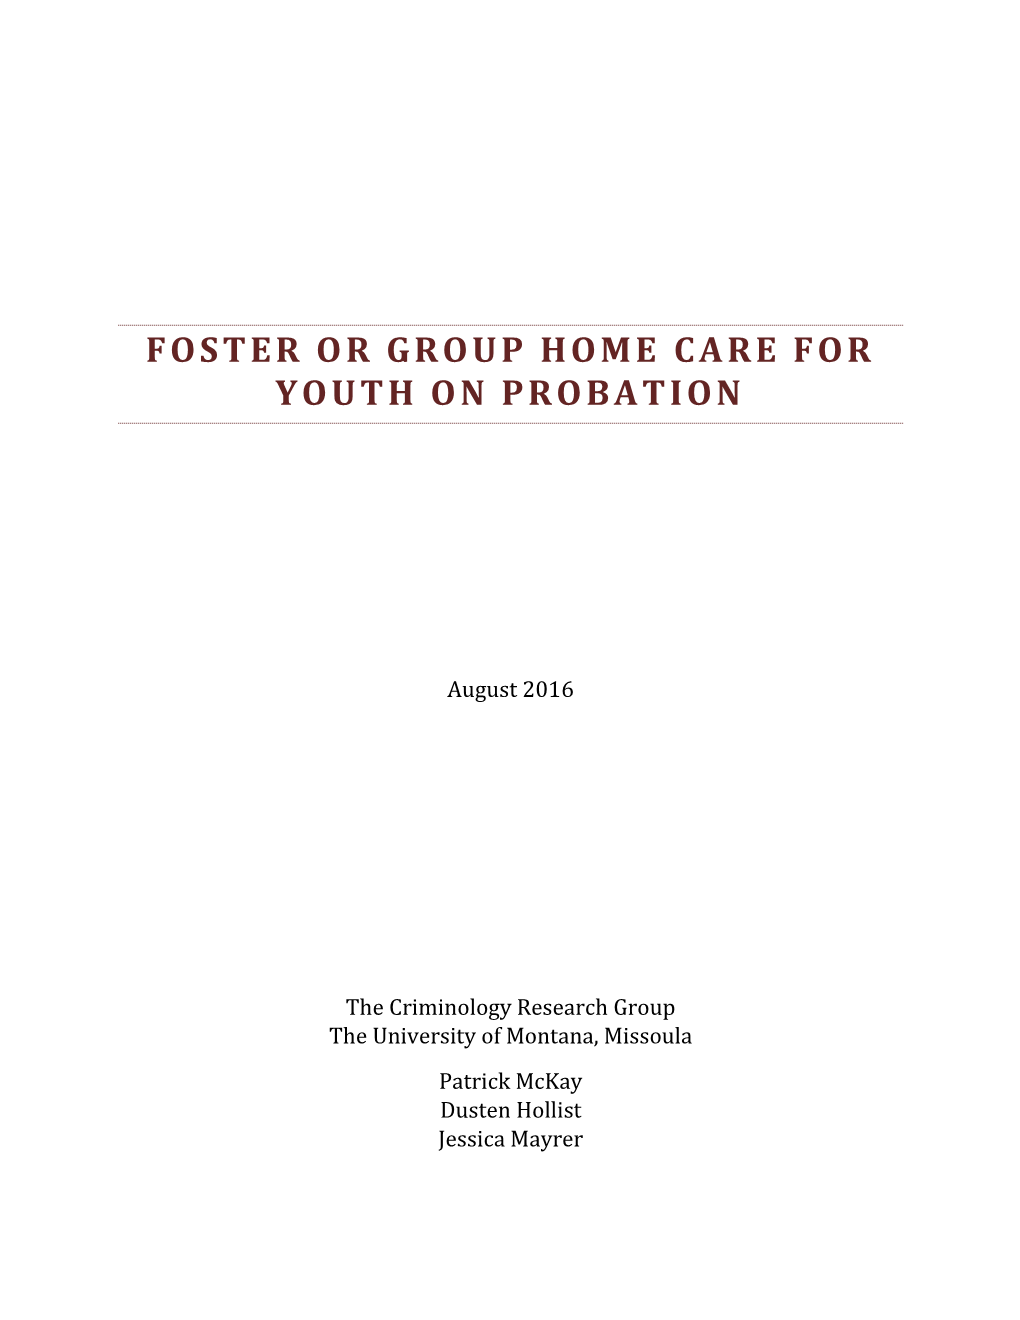 Foster Or Group Home Care for Youth on Probation